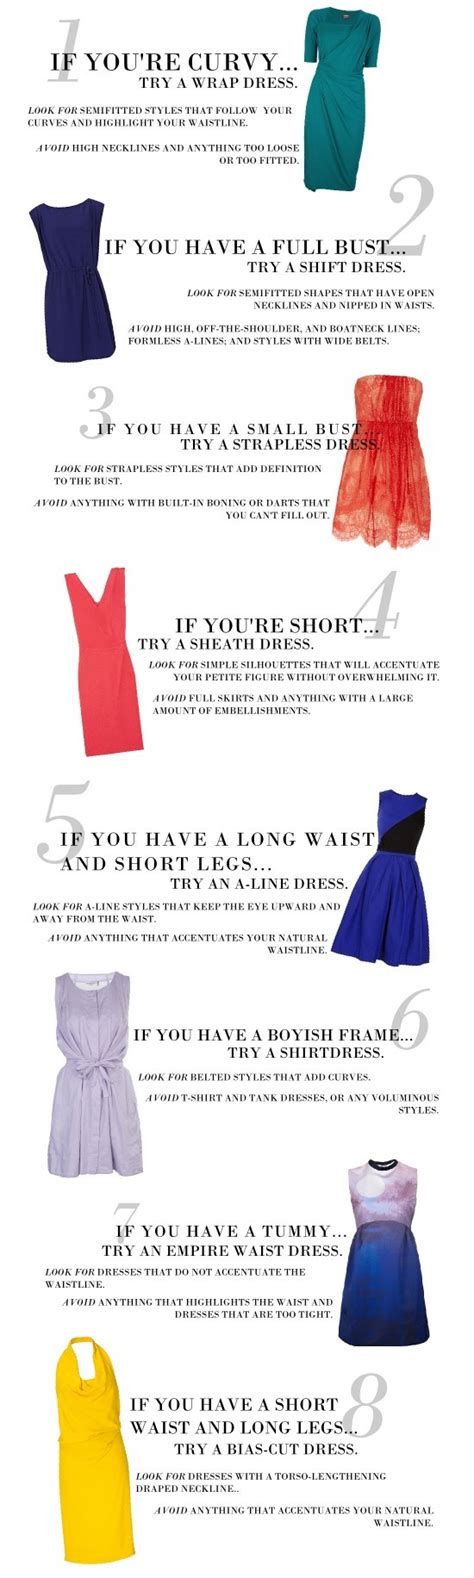 best dresses for your body type via